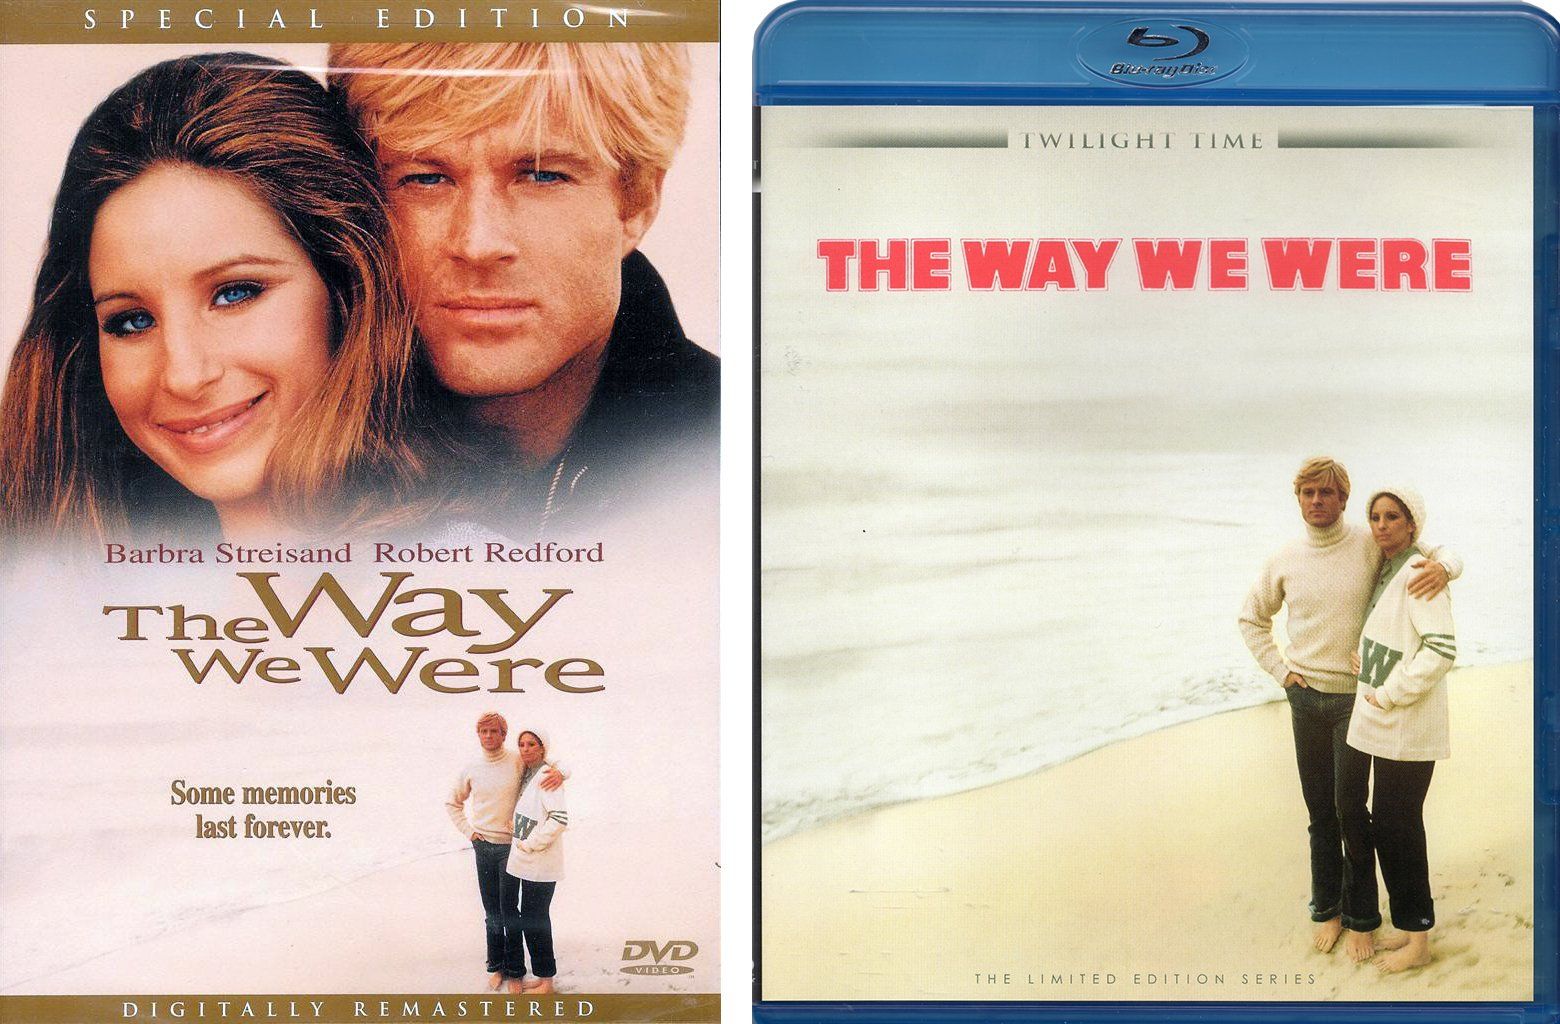 DVD and Blu-ray of The Way We Were